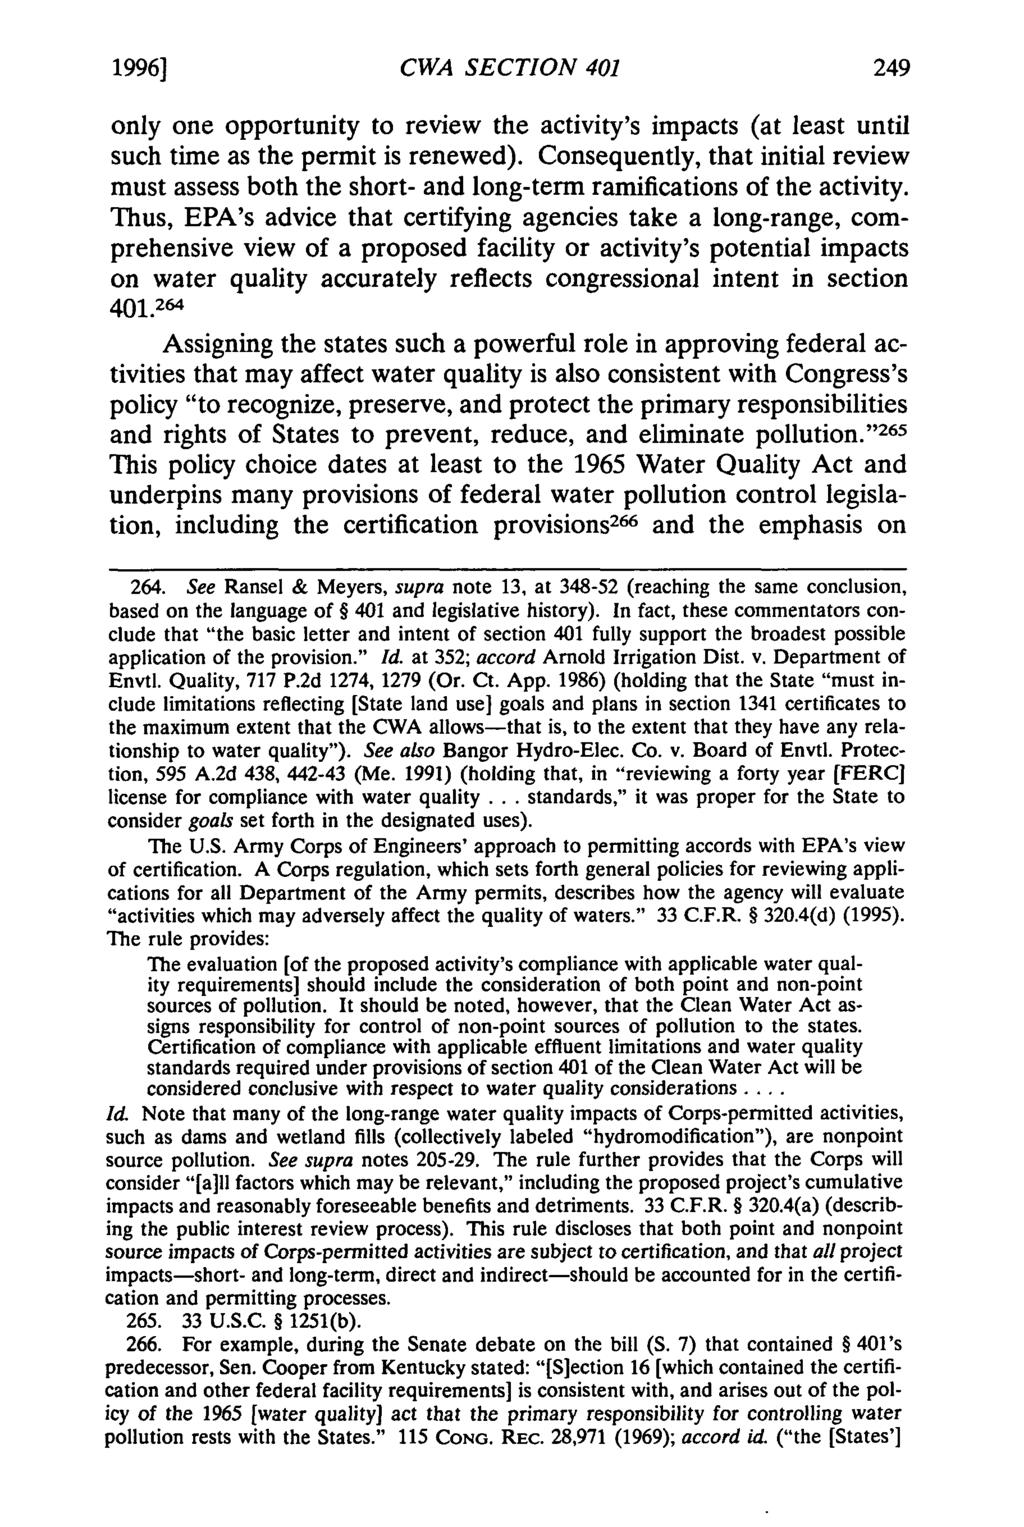 1996] CWA SECTION 401 only one opportunity to review the activity's impacts (at least until such time as the permit is renewed).